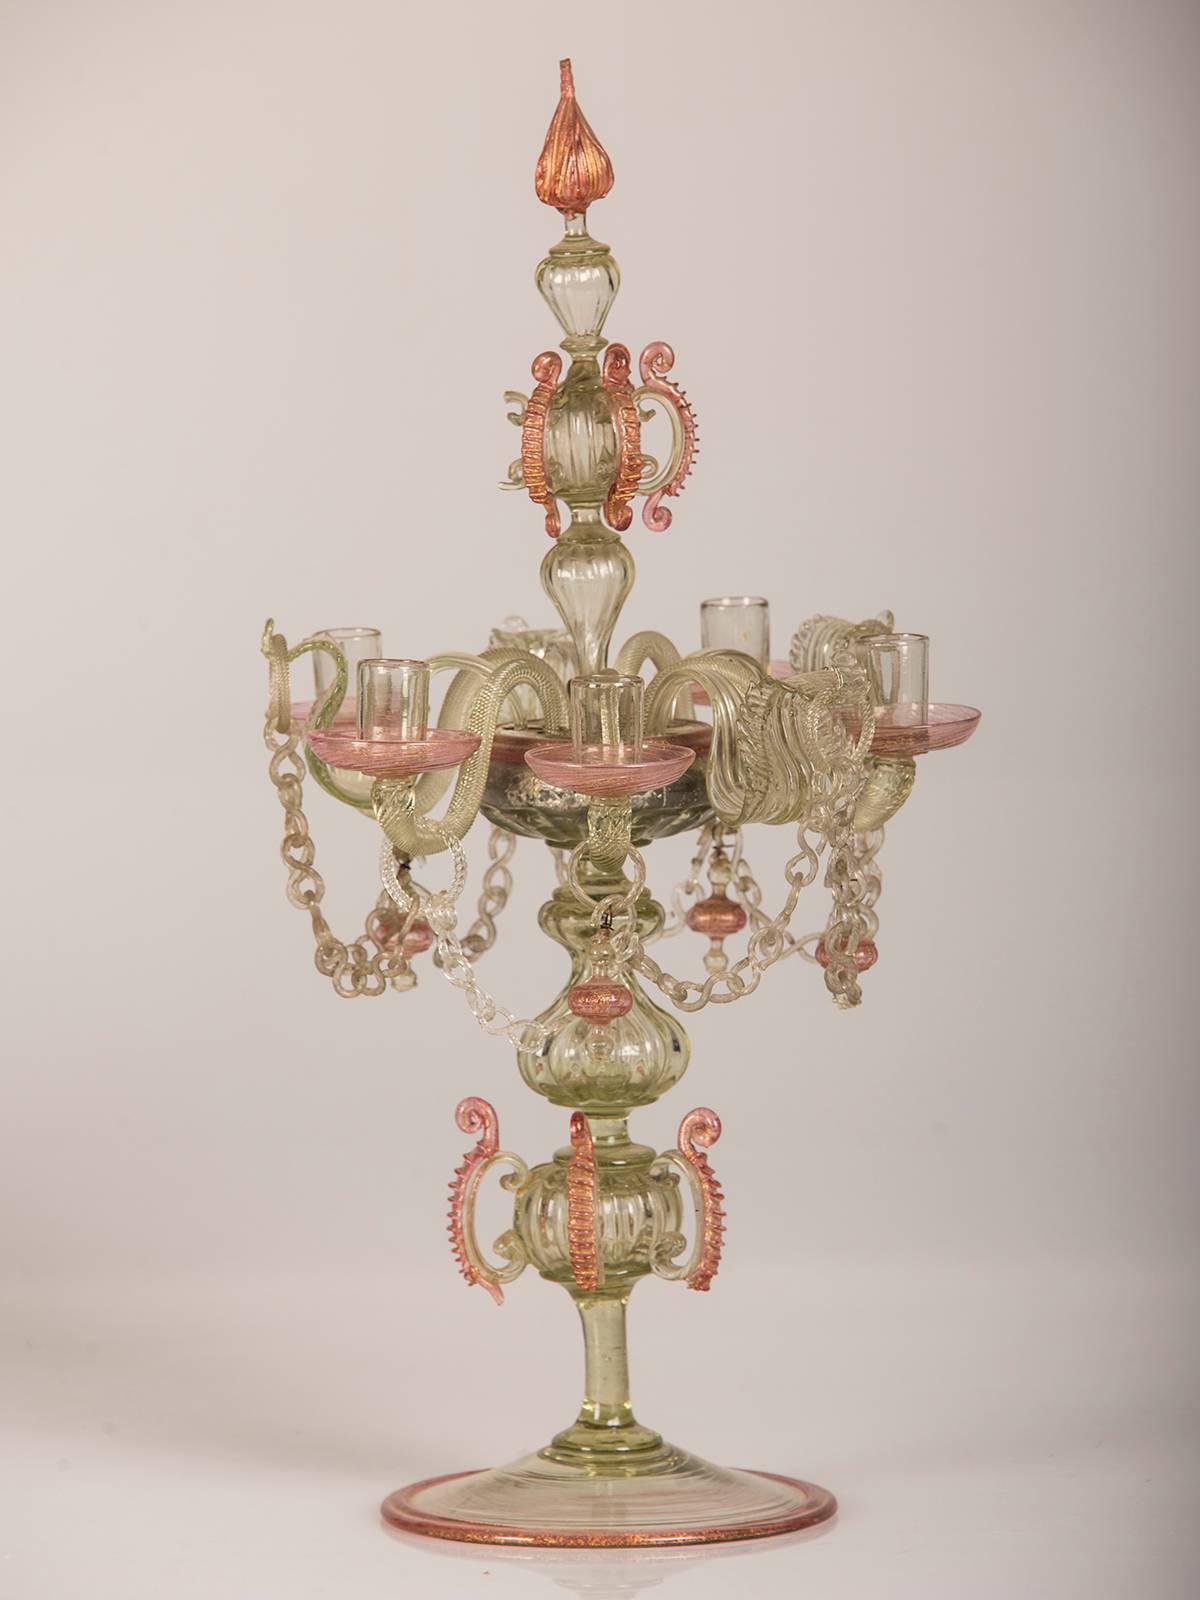 A marvelous pair of antique Italian Rococo period Venetian handblown glass candelabra from Italy circa 1880. The delicate colors and elaborate shape are all hallmarks of true period Venetian origin. Please use the zoom feature to see all the details